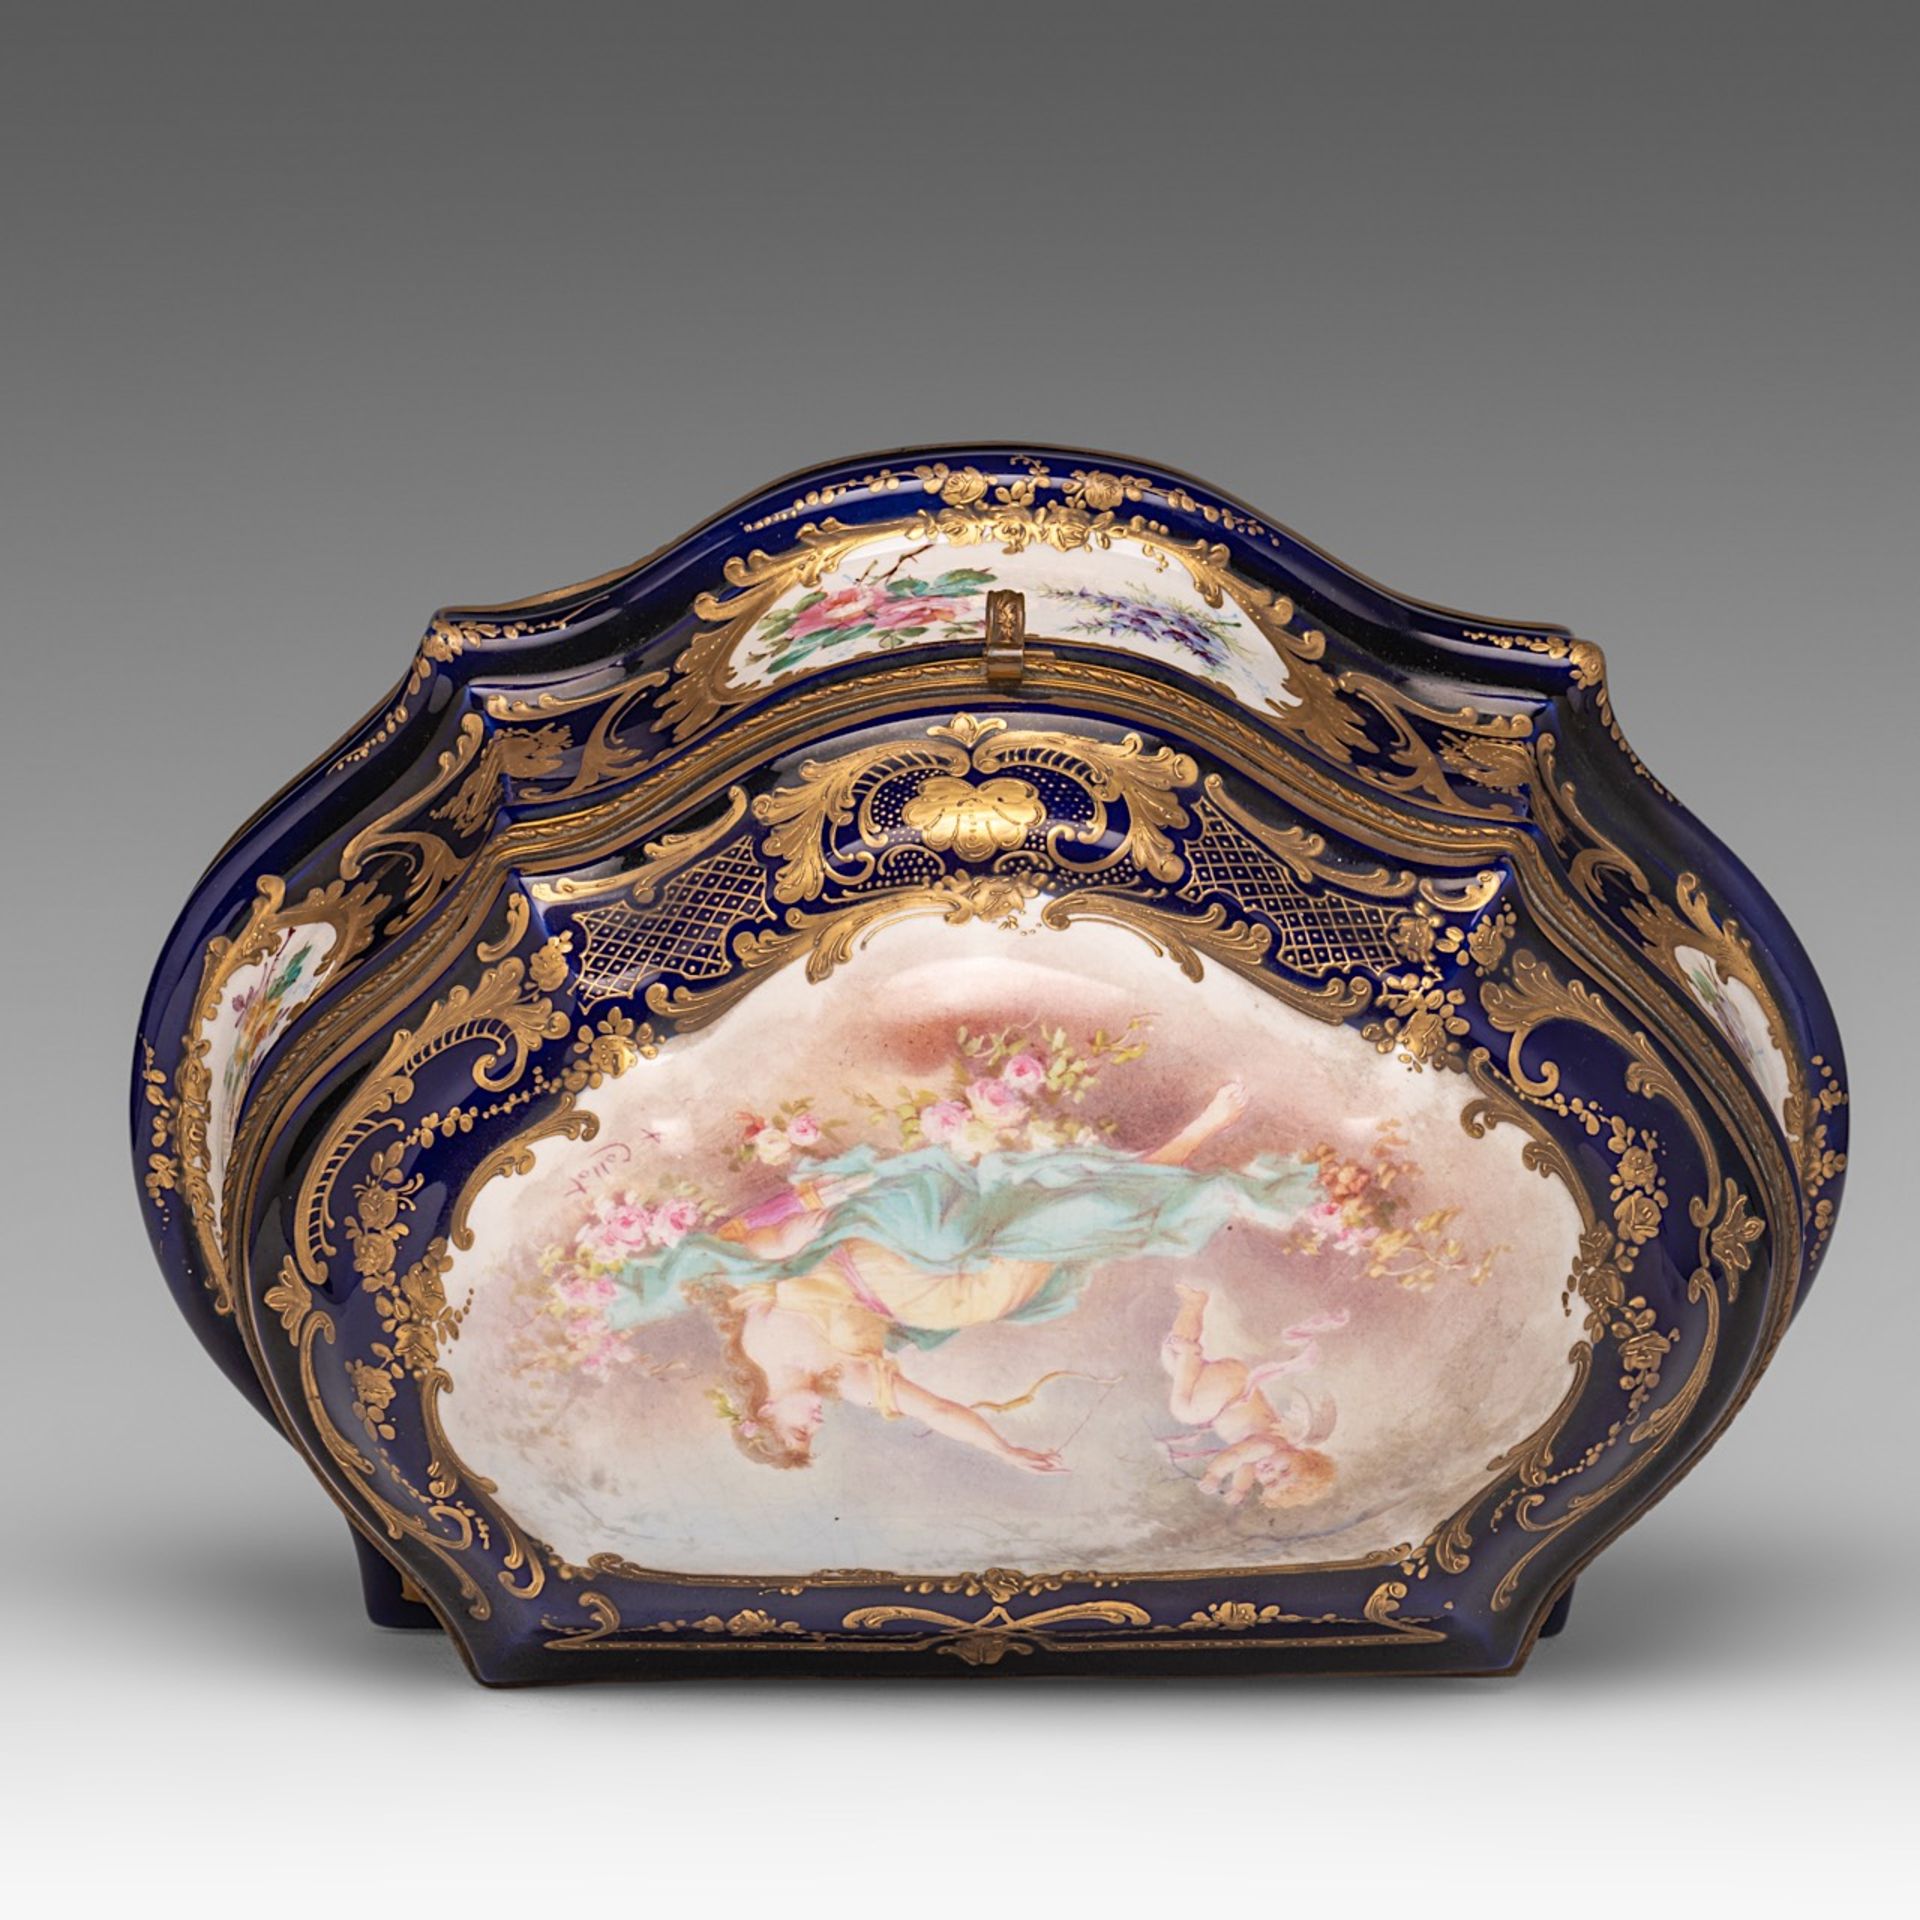 A fine bleu royale ground Sevres box with gilt decoration and hand-painted roundels, signed A. Collo - Image 6 of 12